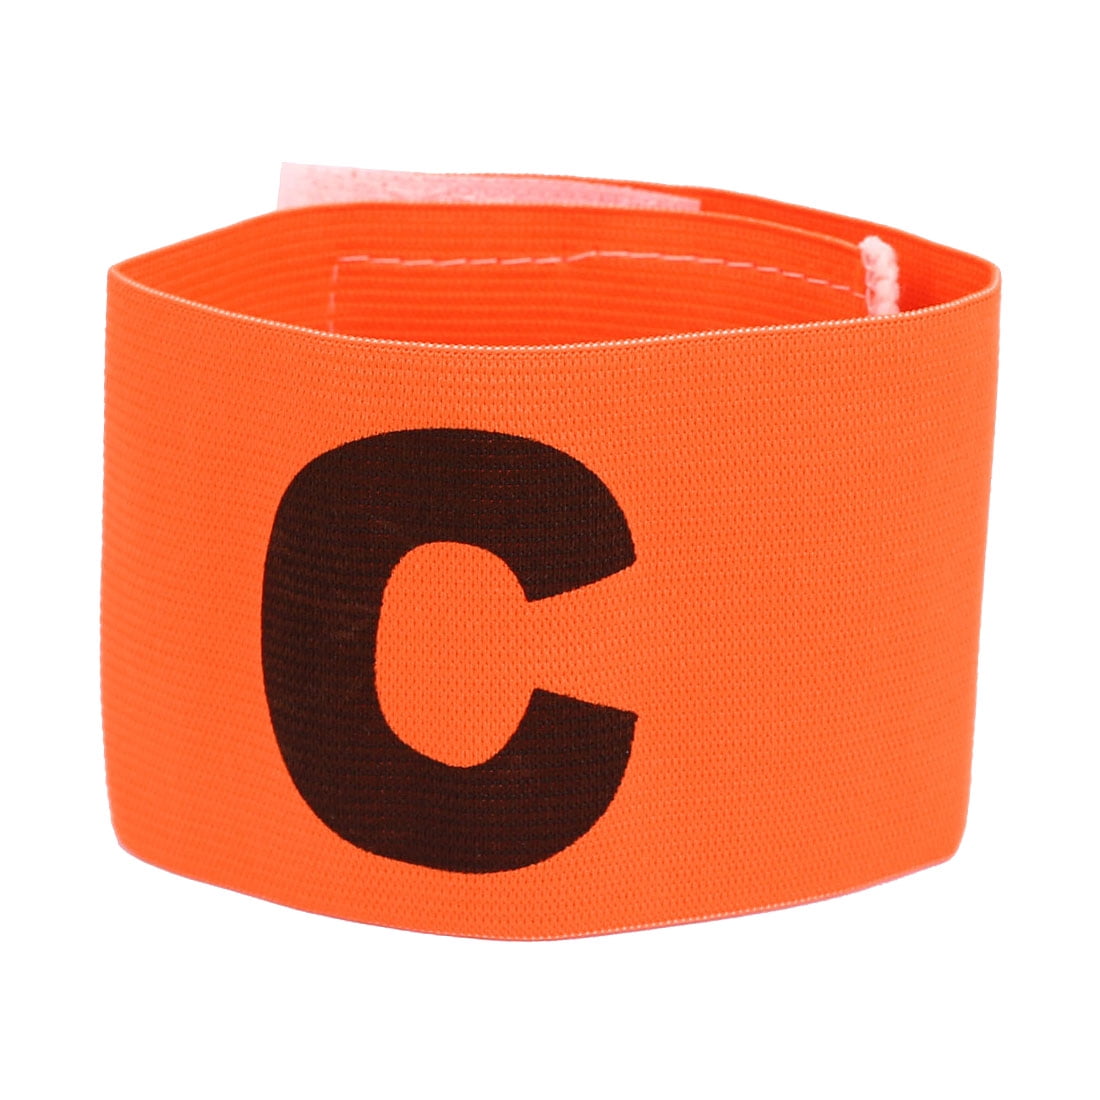 Fliyeong Captains Arm Band Youth & Adult Size Football Soccer Sports Elastic Armband Cost-Effective and Good Quality